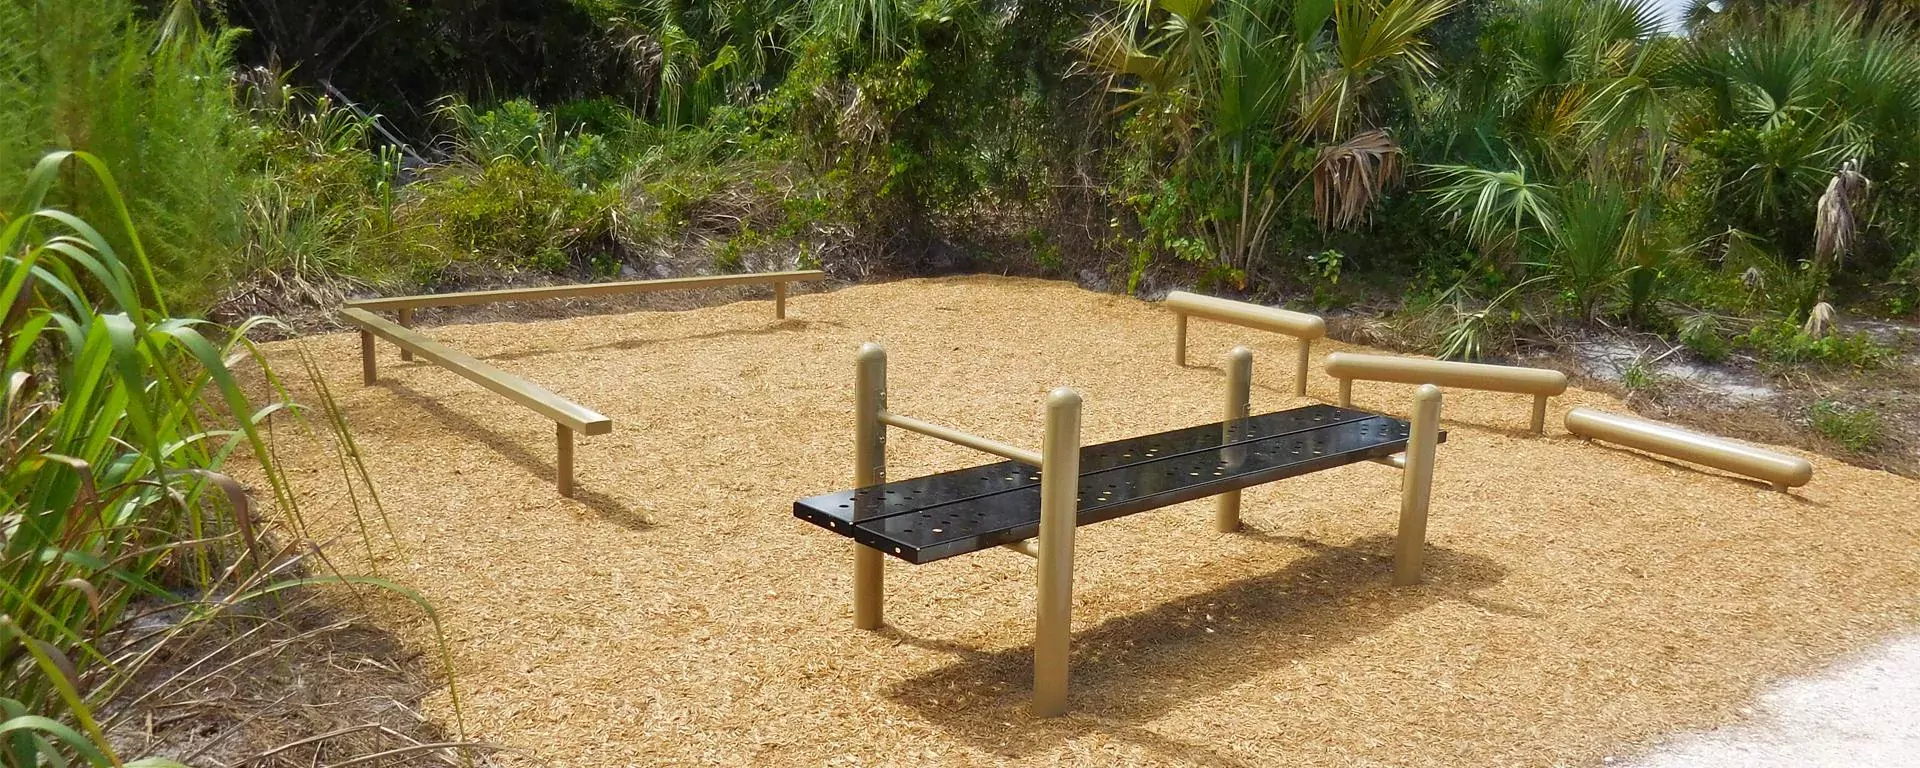 Exercise stations at Gomez Preserve